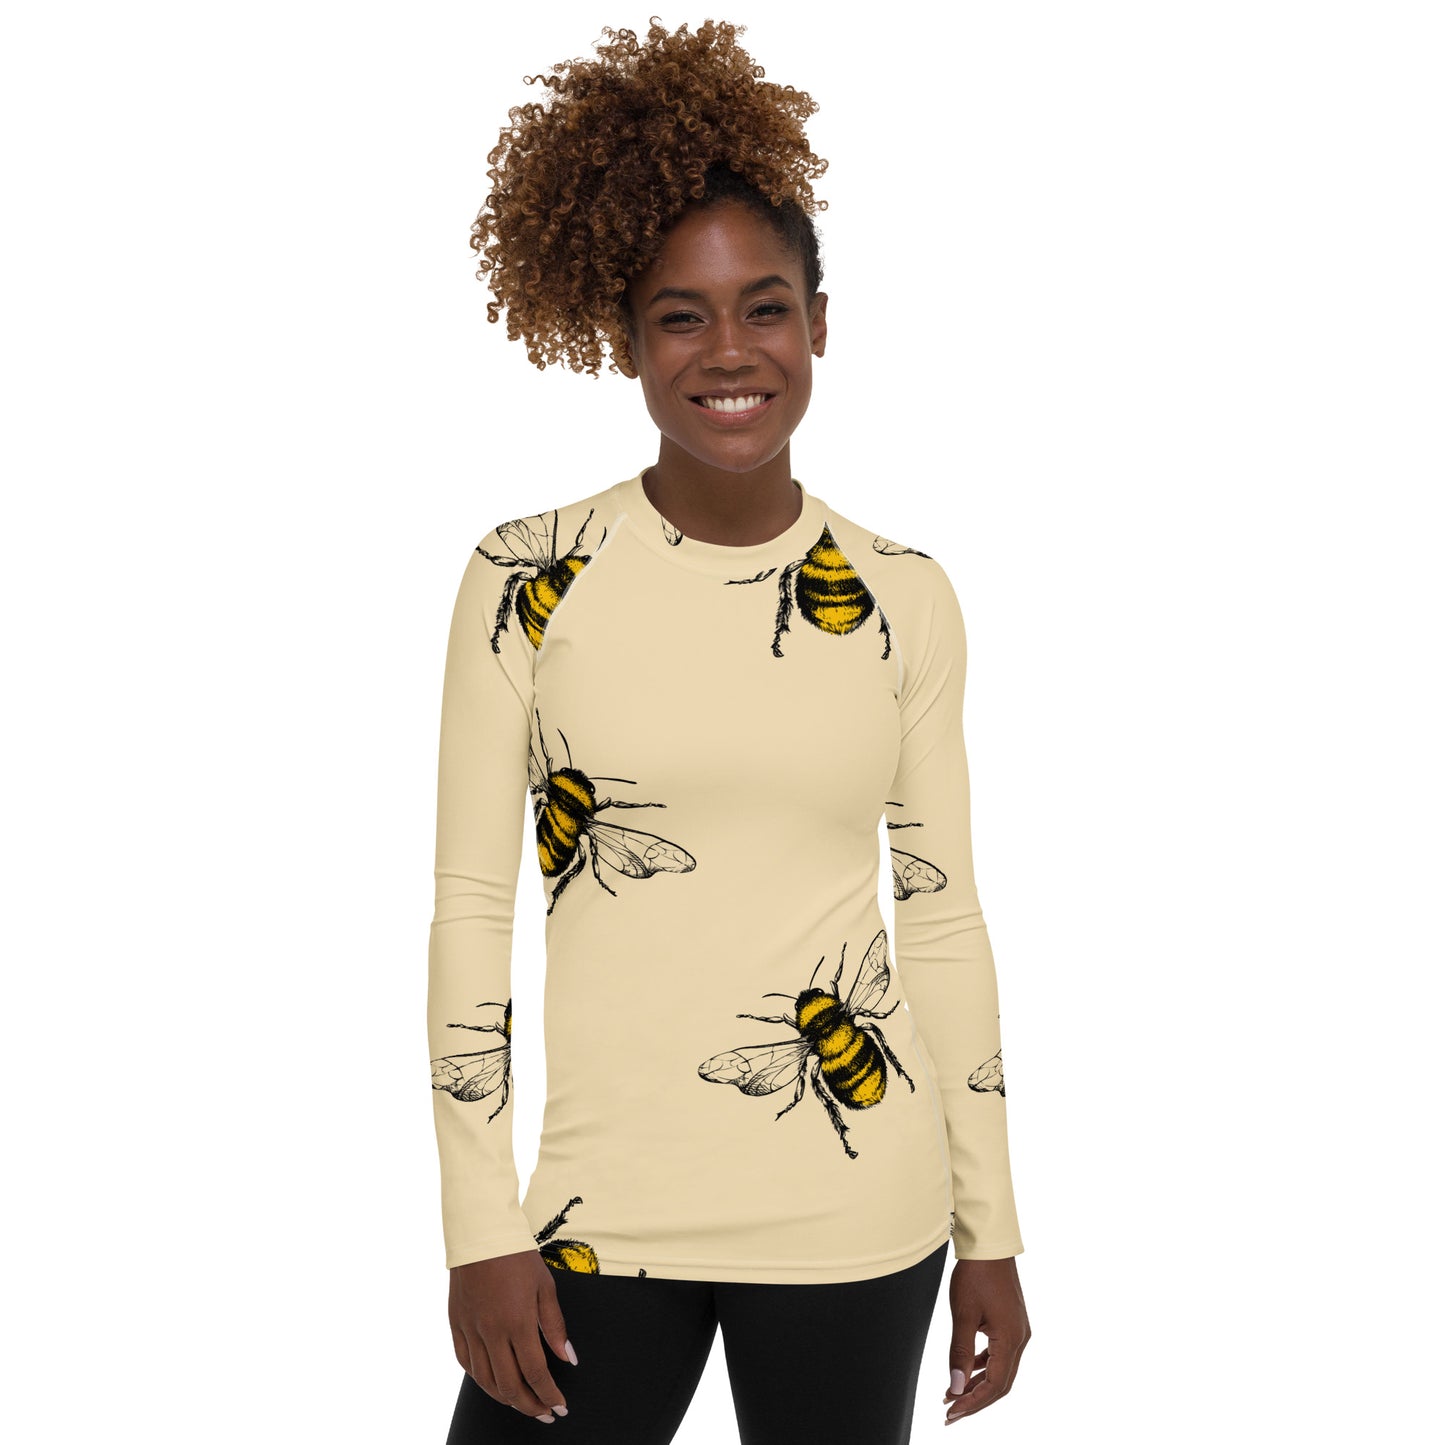 "Wasps" patterned women's long-sleeved shirt